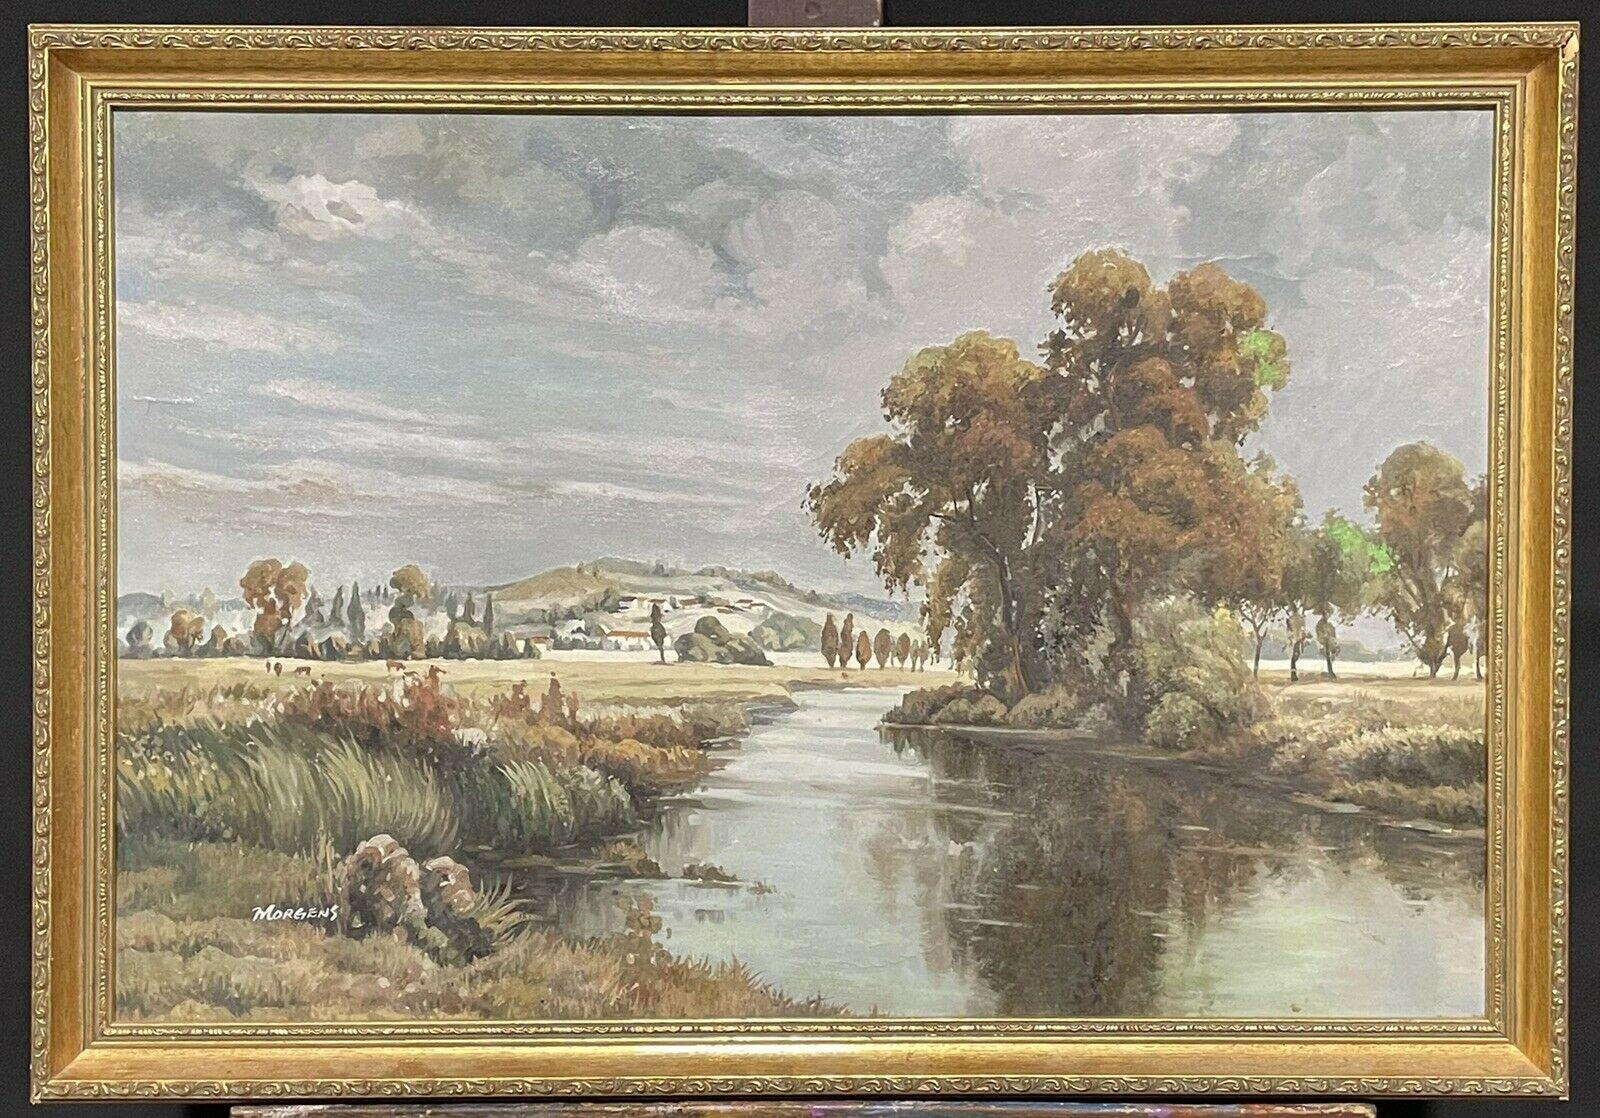 LARGE SIGNED BRITISH OIL PAINTING - EXTENSIVE RIVER LANDSCAPE DISTANT HILLS - Painting by English oil painting